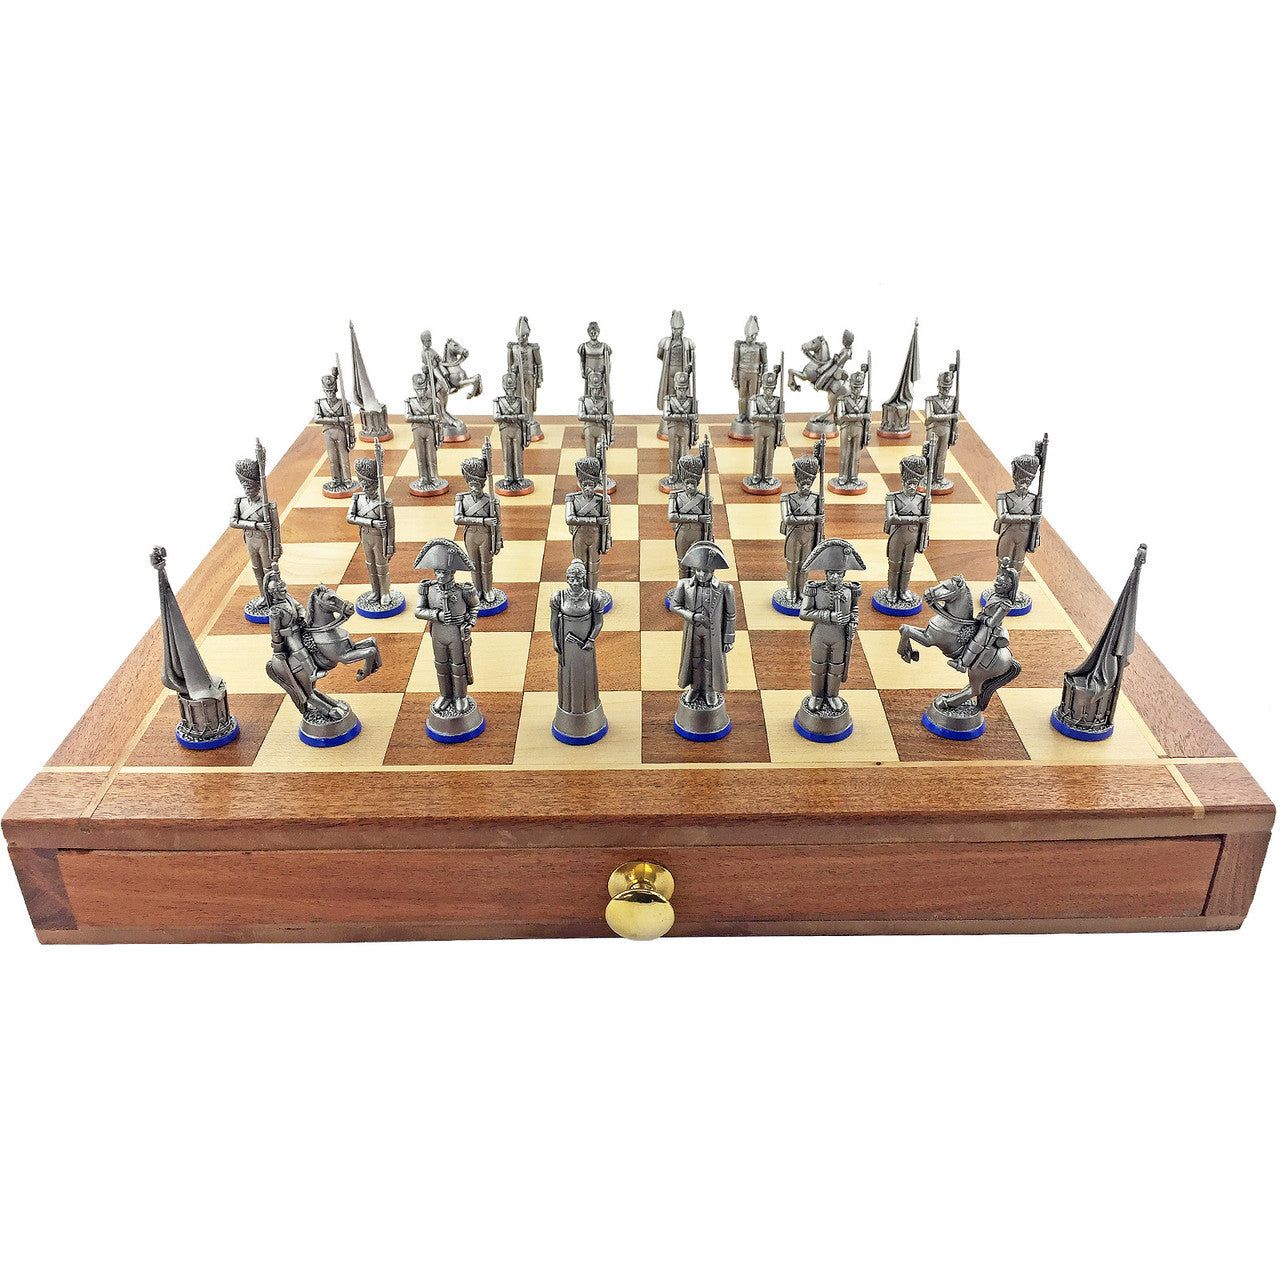 Toy soldier chess set Battle of Waterloo.